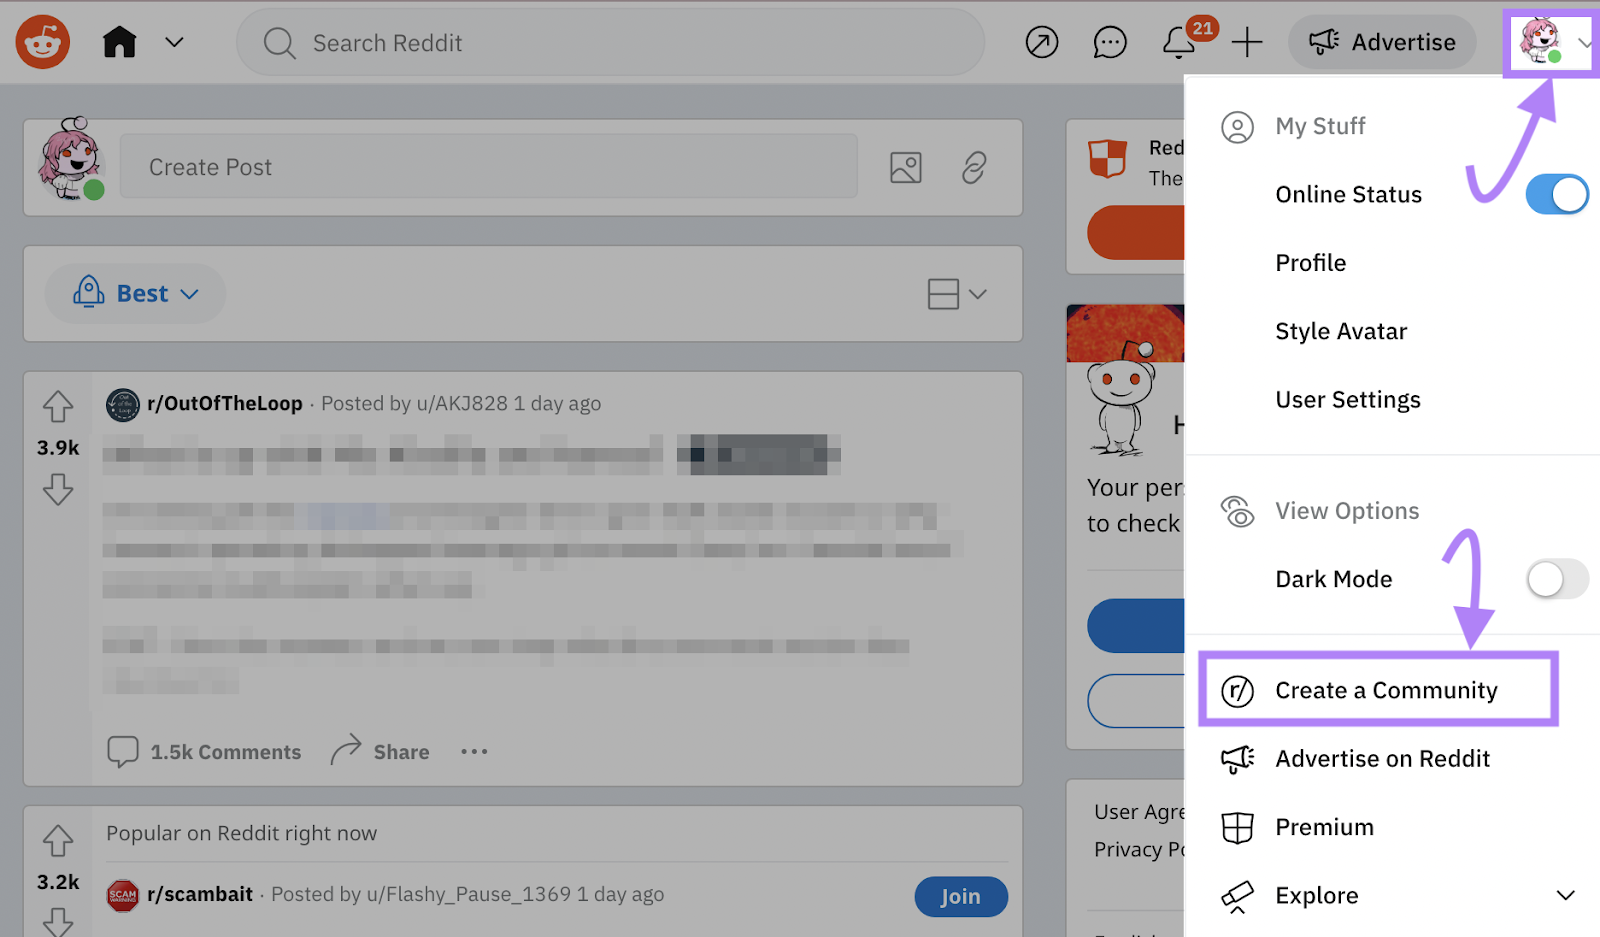 “Create Community” button selected on the right side of Reddit homepage